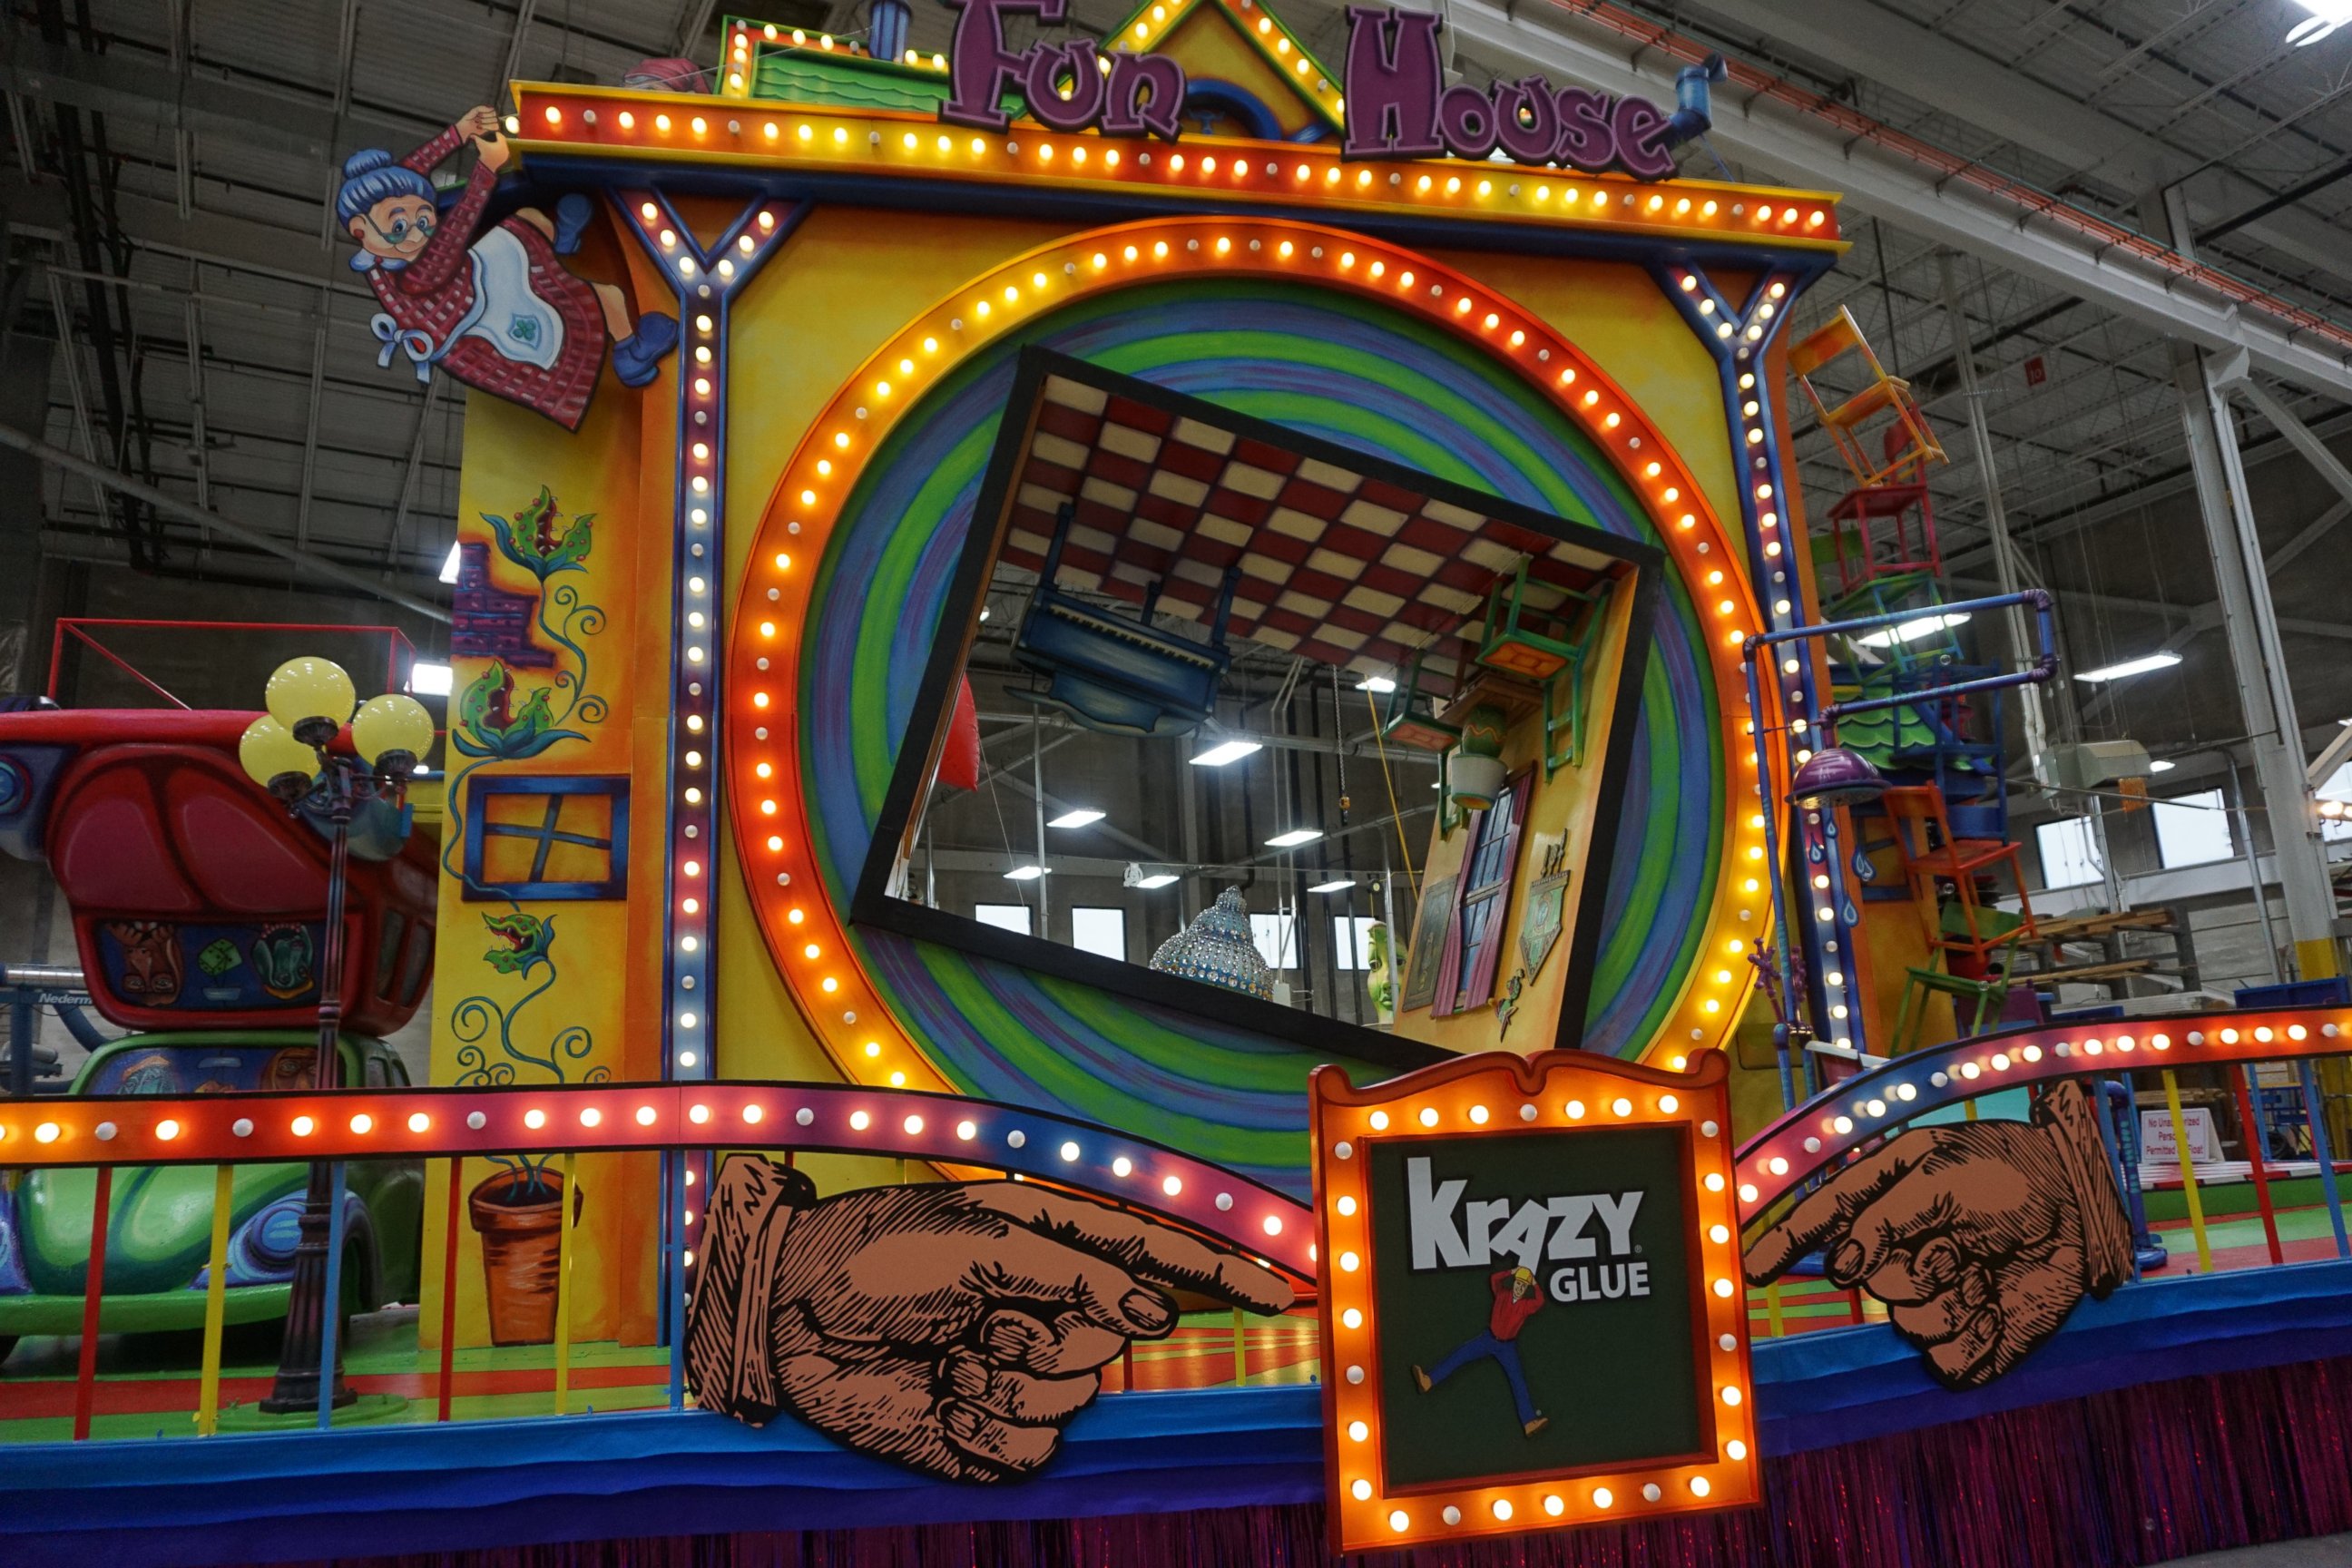 PHOTO: The Fun House Krazy Glue float will debut in the Macy's Thanksgiving Day Parade 2016.